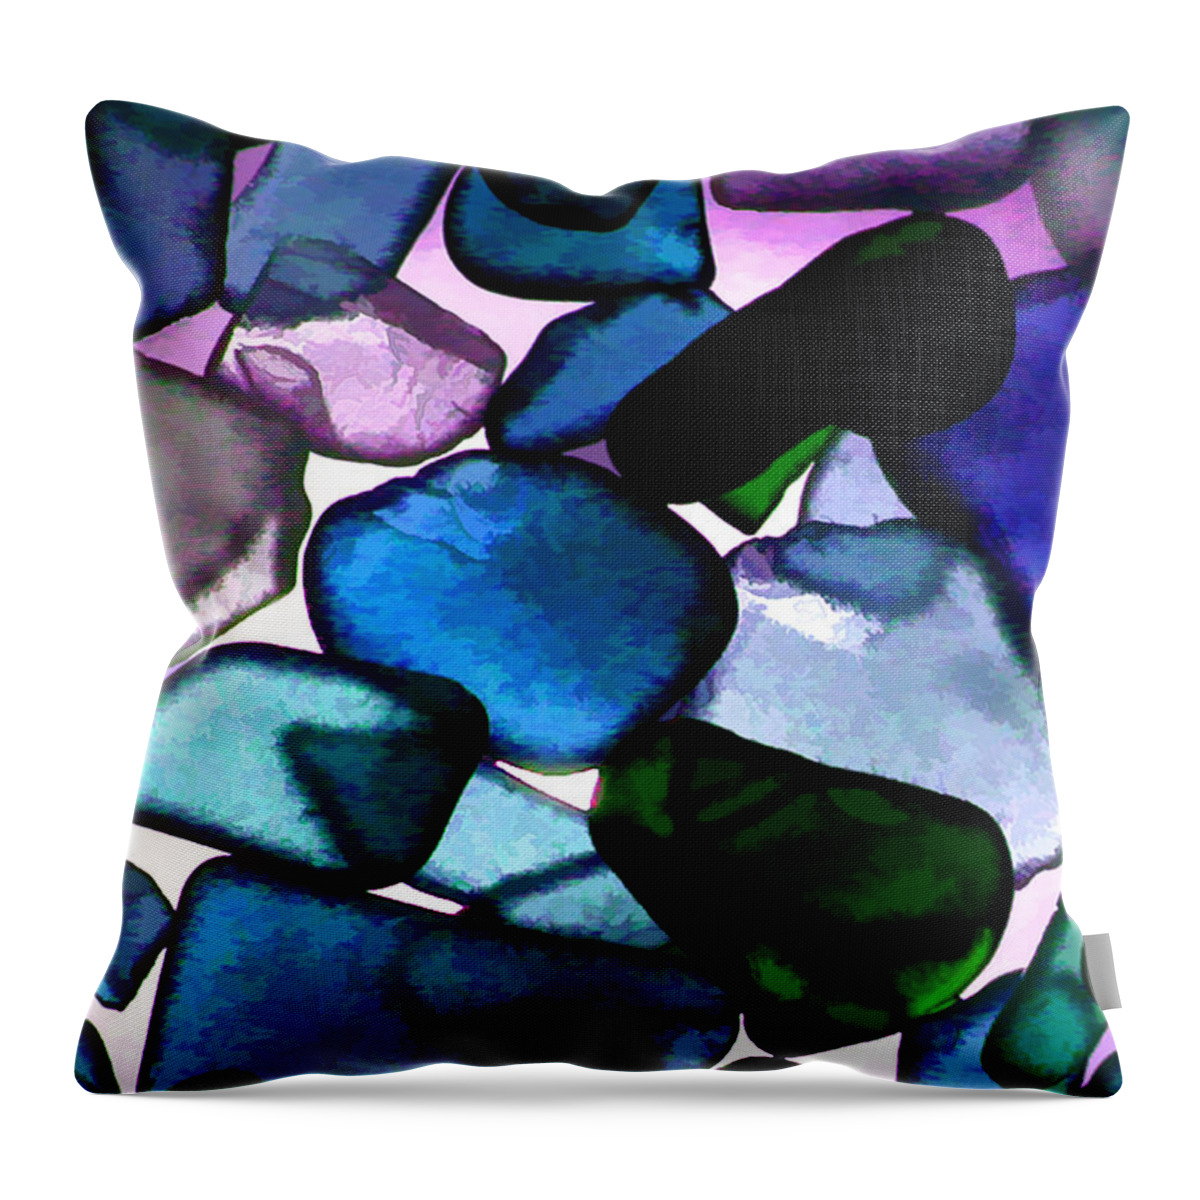 Sea Glass Throw Pillow featuring the photograph Sea Glass by Cathy Kovarik